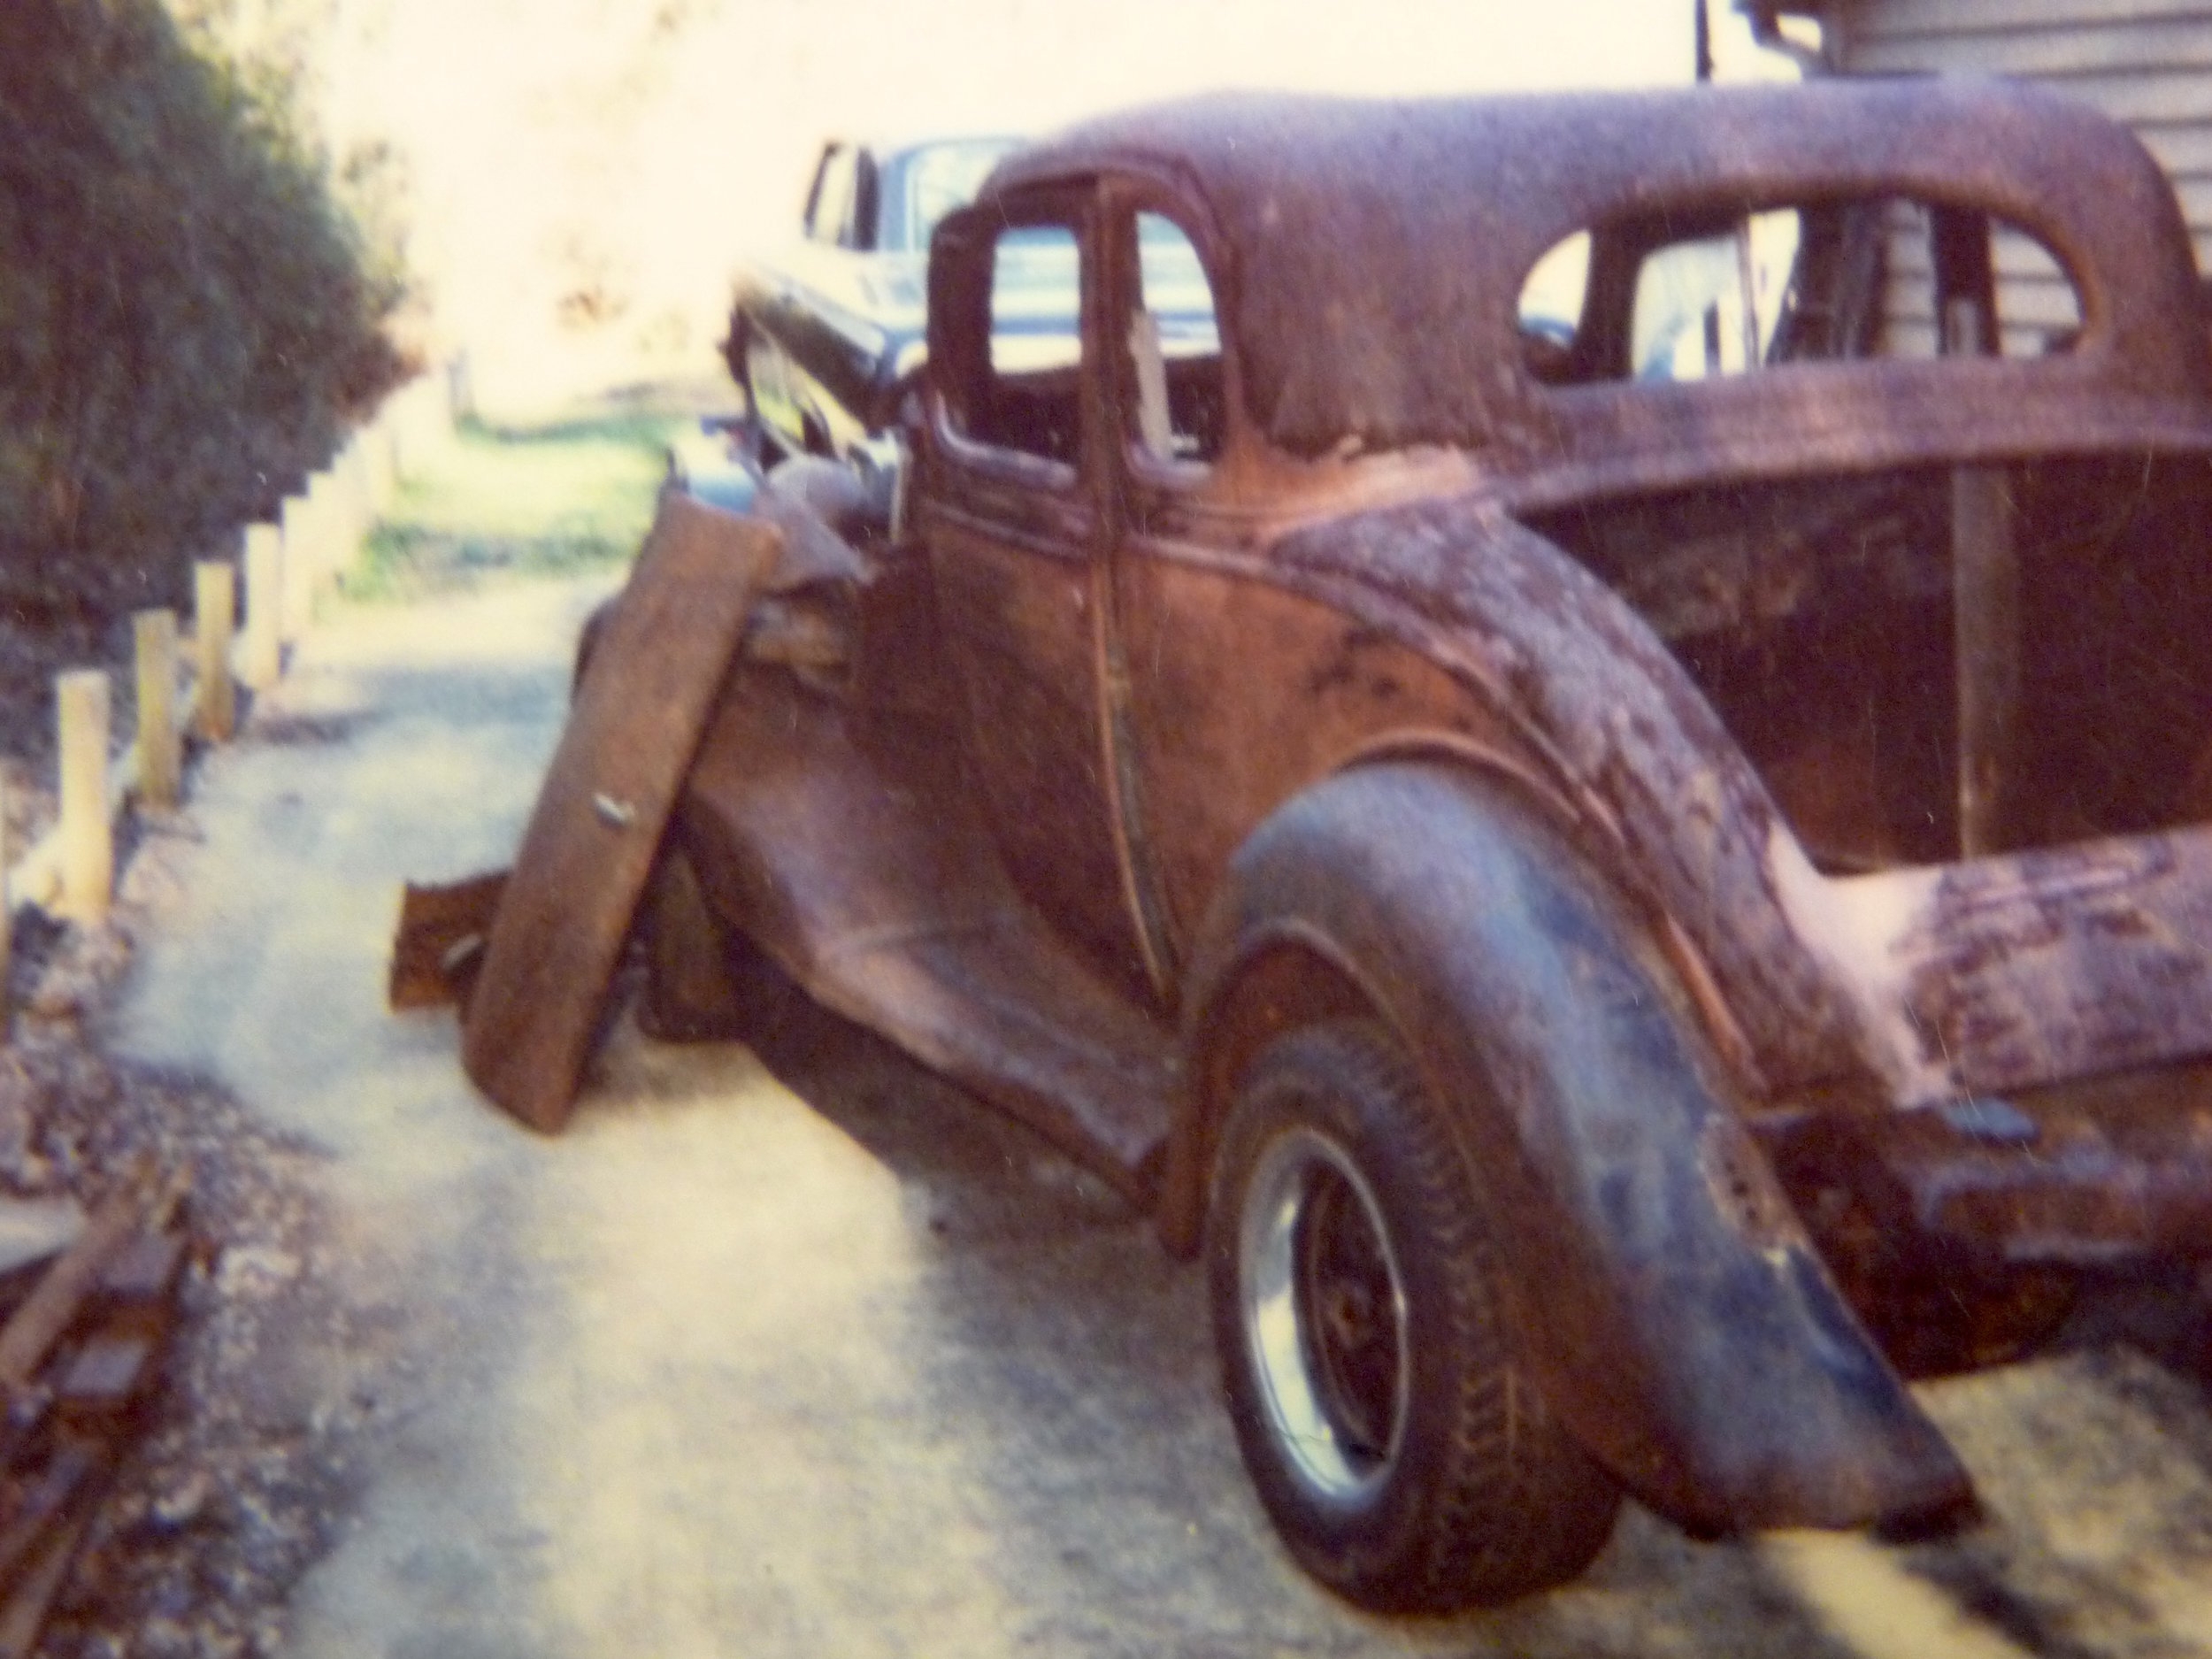 1934 Chevy Coupe Before Restoration.jpg